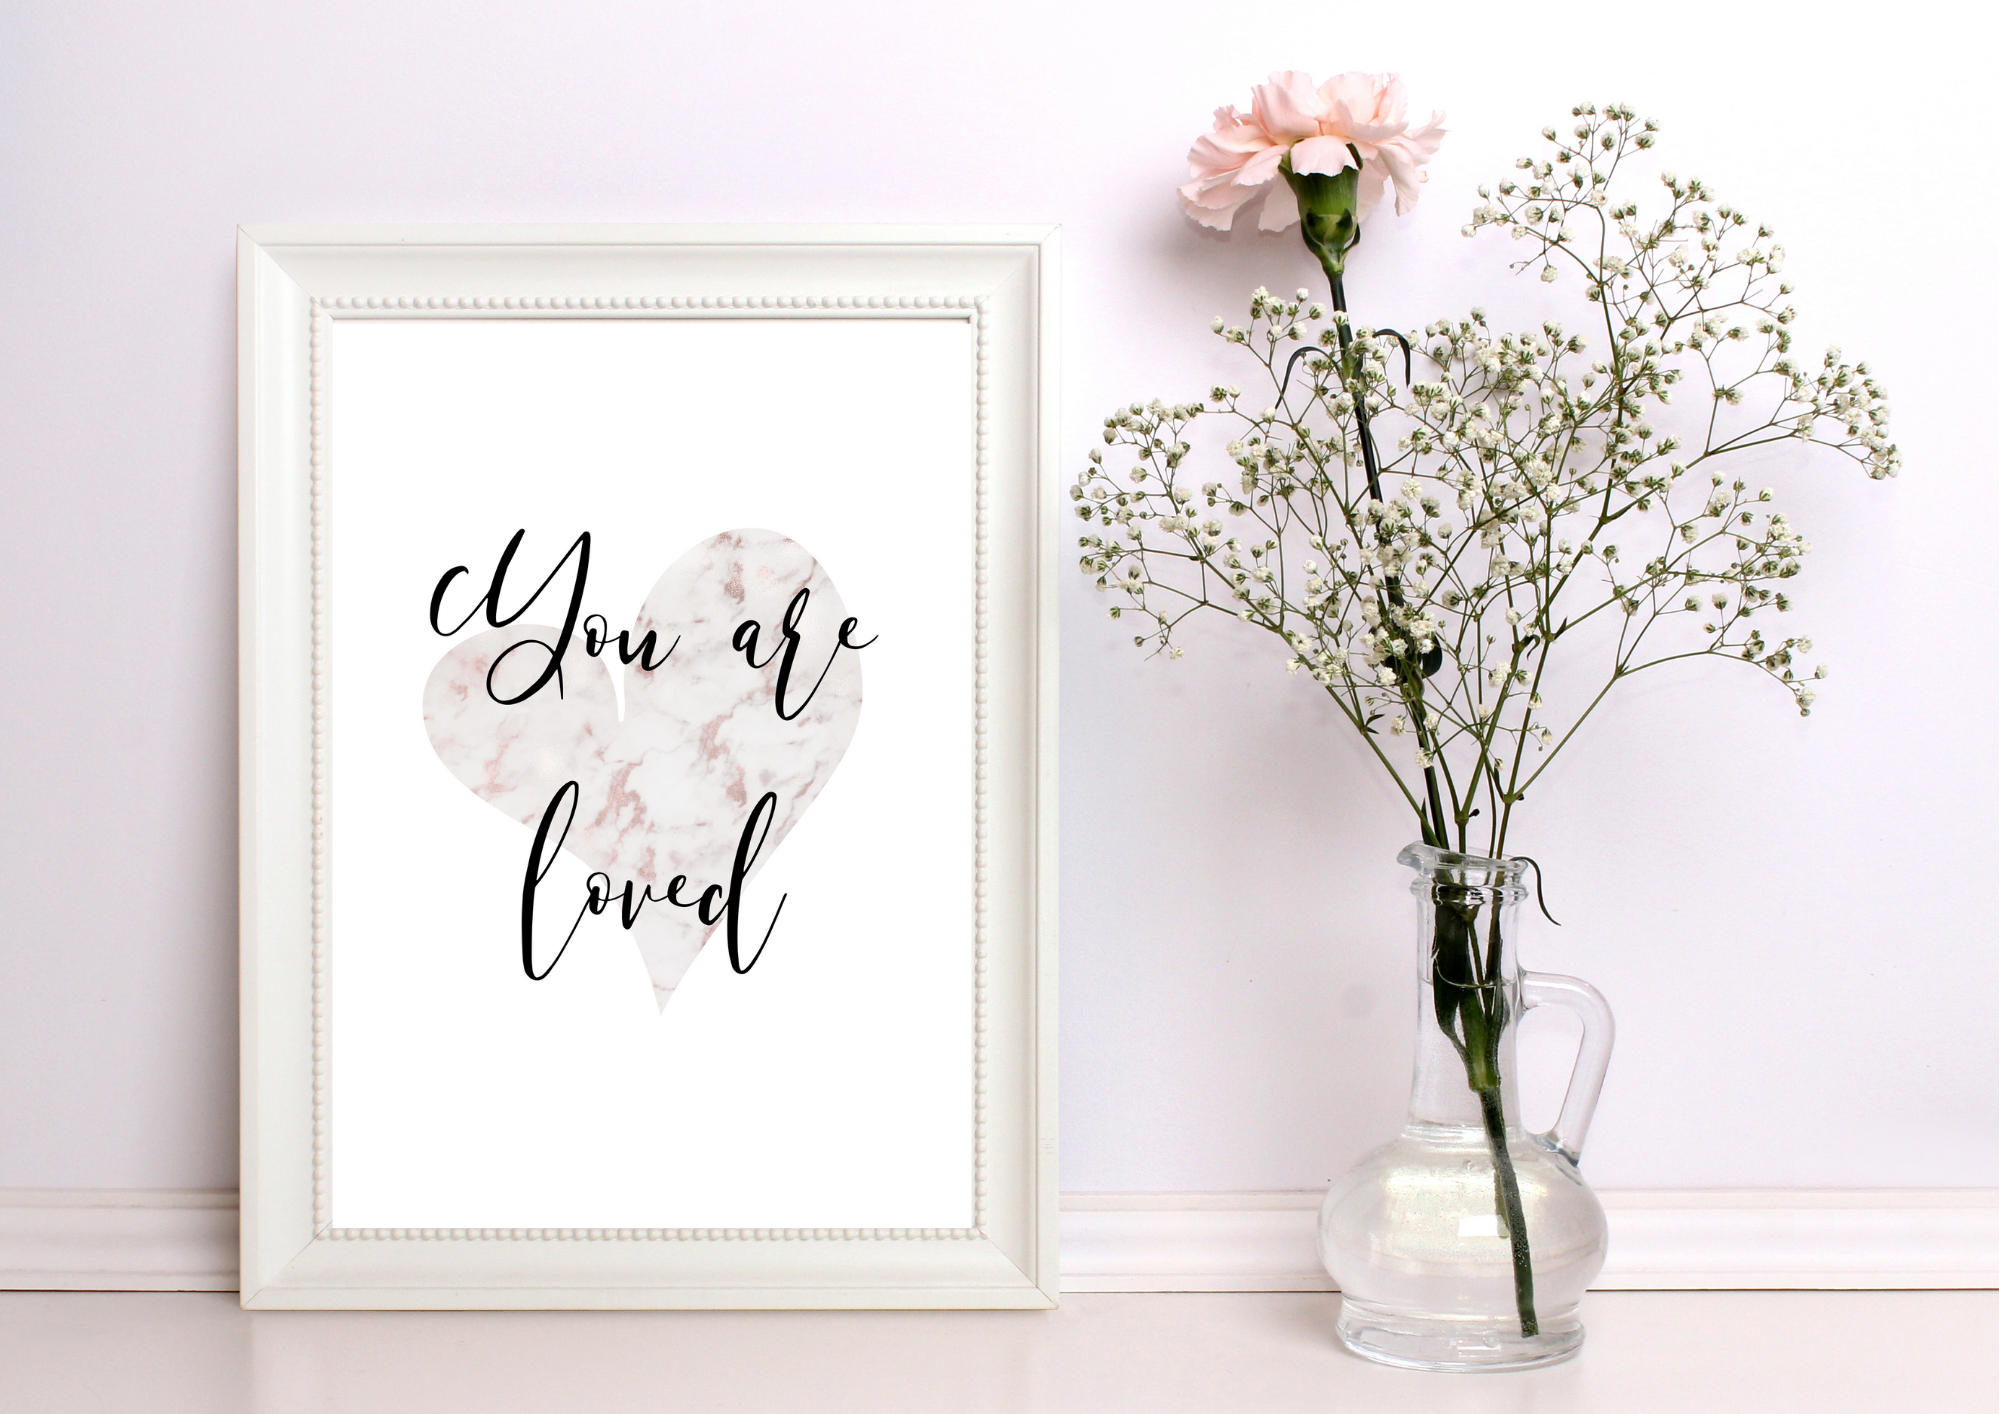 You Are Loved | Decor Print - Auxano Life